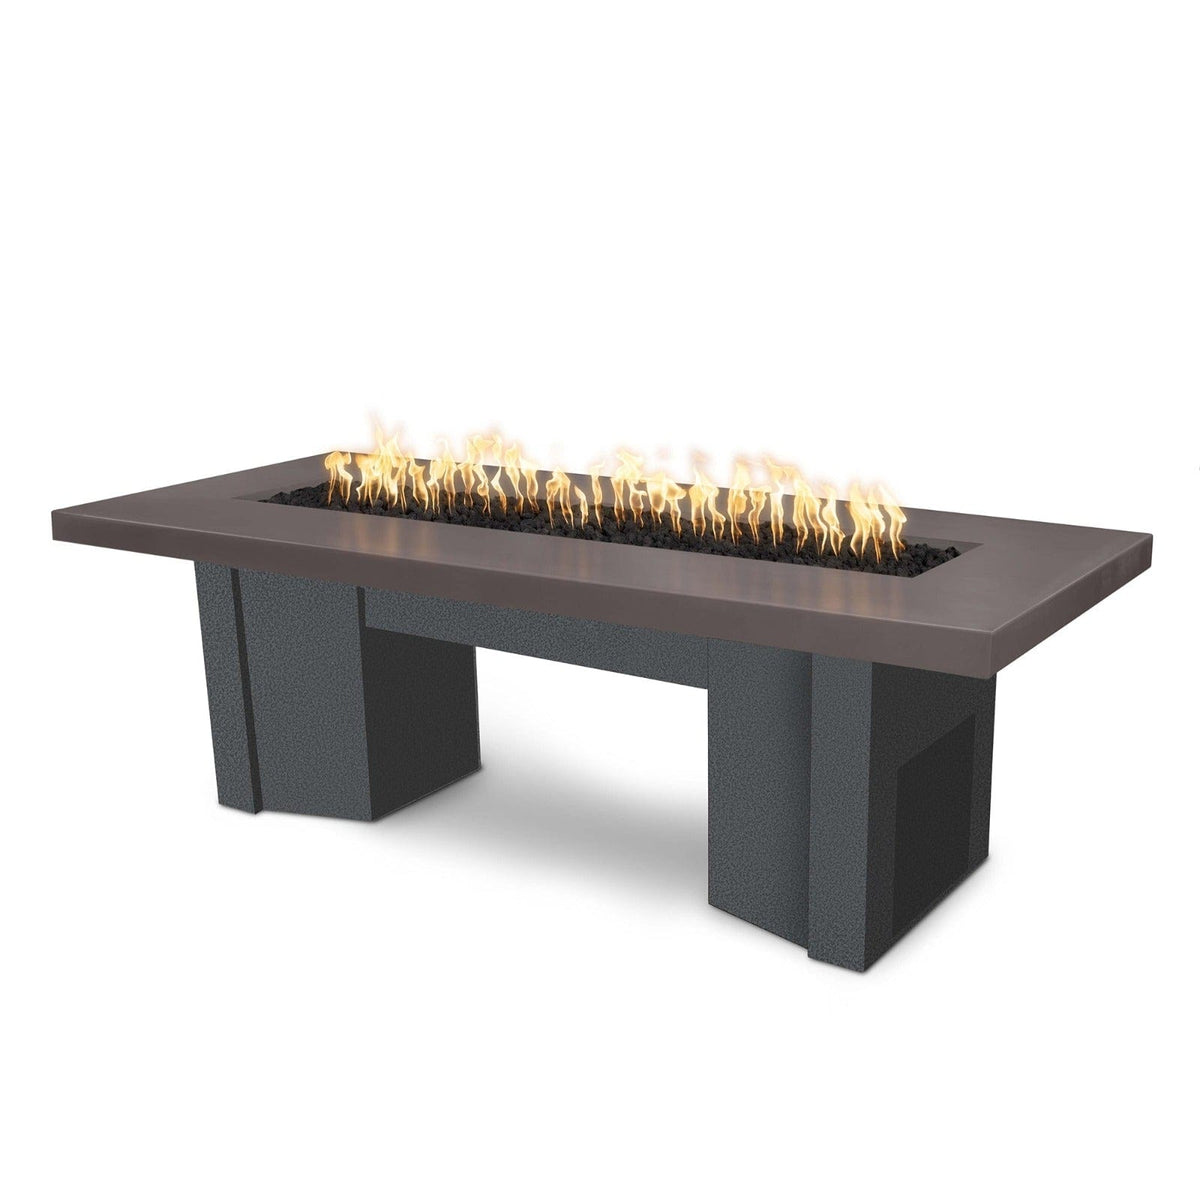 The Outdoor Plus Fire Features Chestnut (-CST) / Silver Vein Powder Coated Steel (-SLV) The Outdoor Plus 60&quot; Alameda Fire Table Smooth Concrete in Natural Gas - Match Lit with Flame Sense System / OPT-ALMGFRC60FSML-NG